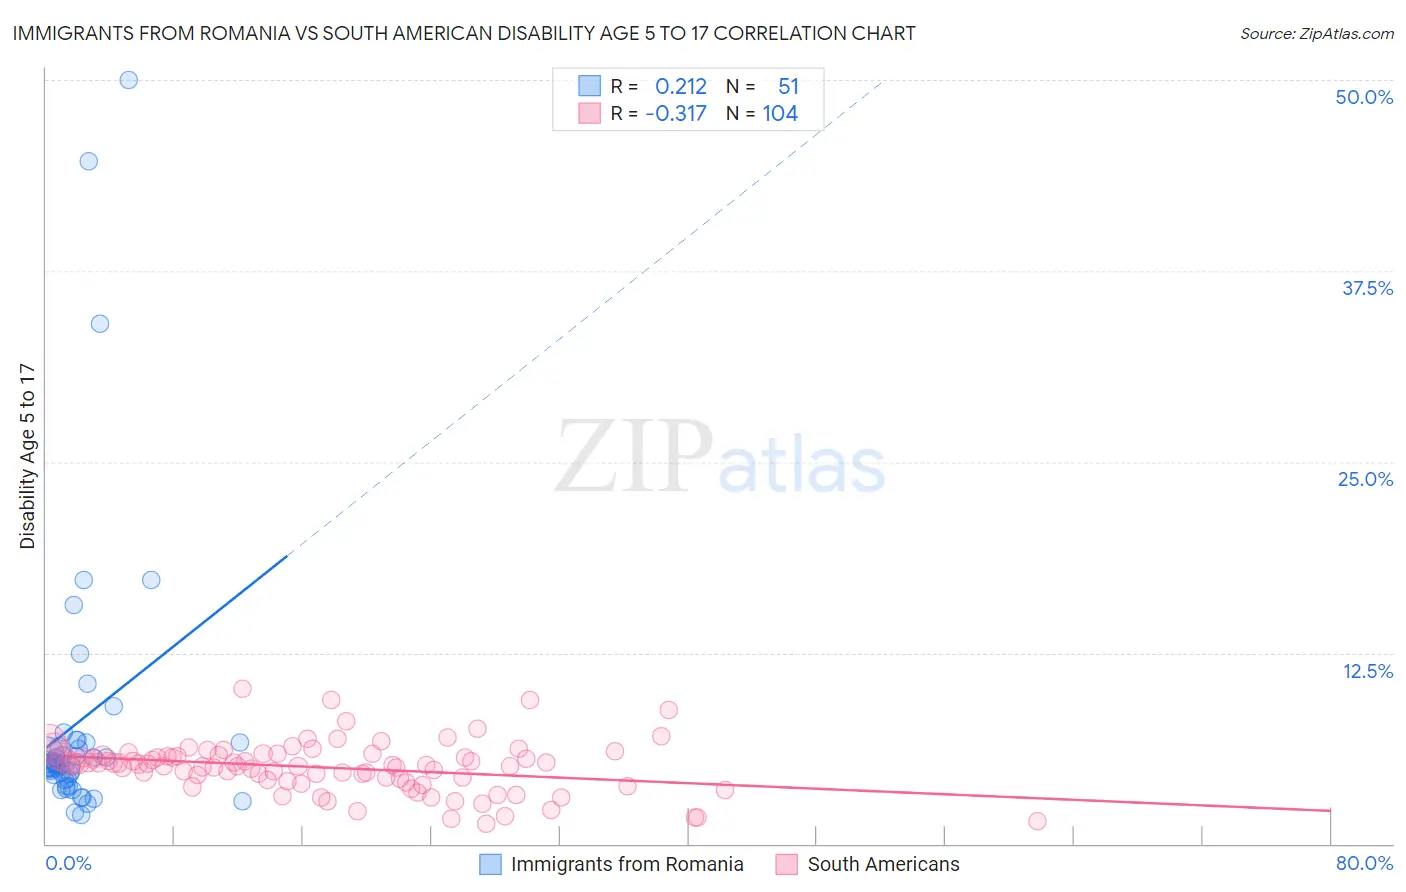 Immigrants from Romania vs South American Disability Age 5 to 17